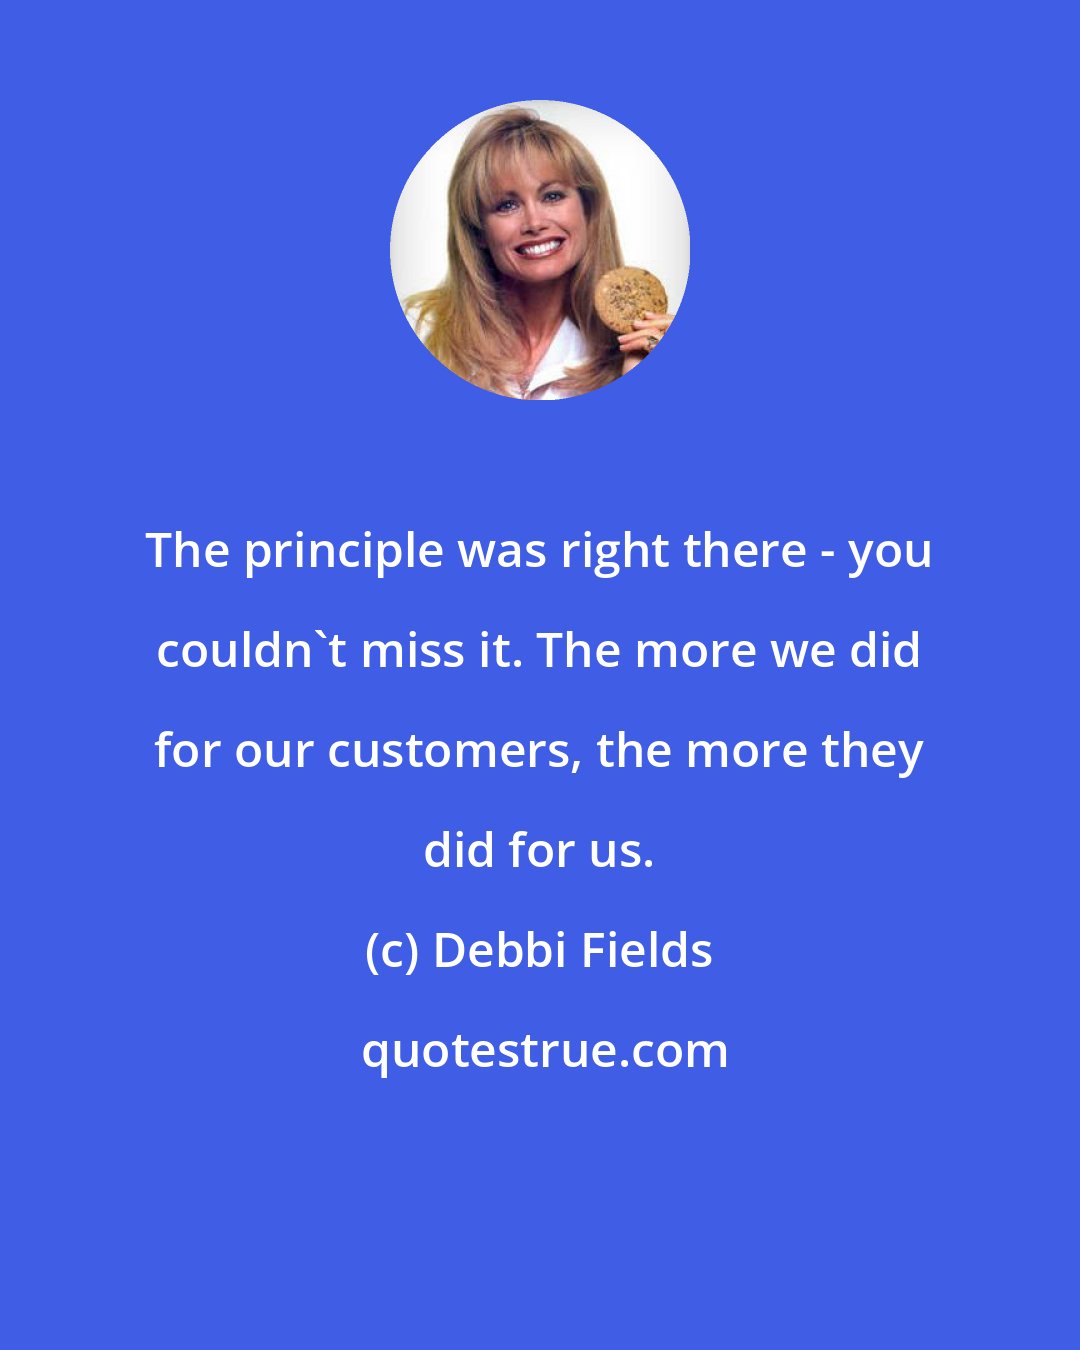 Debbi Fields: The principle was right there - you couldn't miss it. The more we did for our customers, the more they did for us.